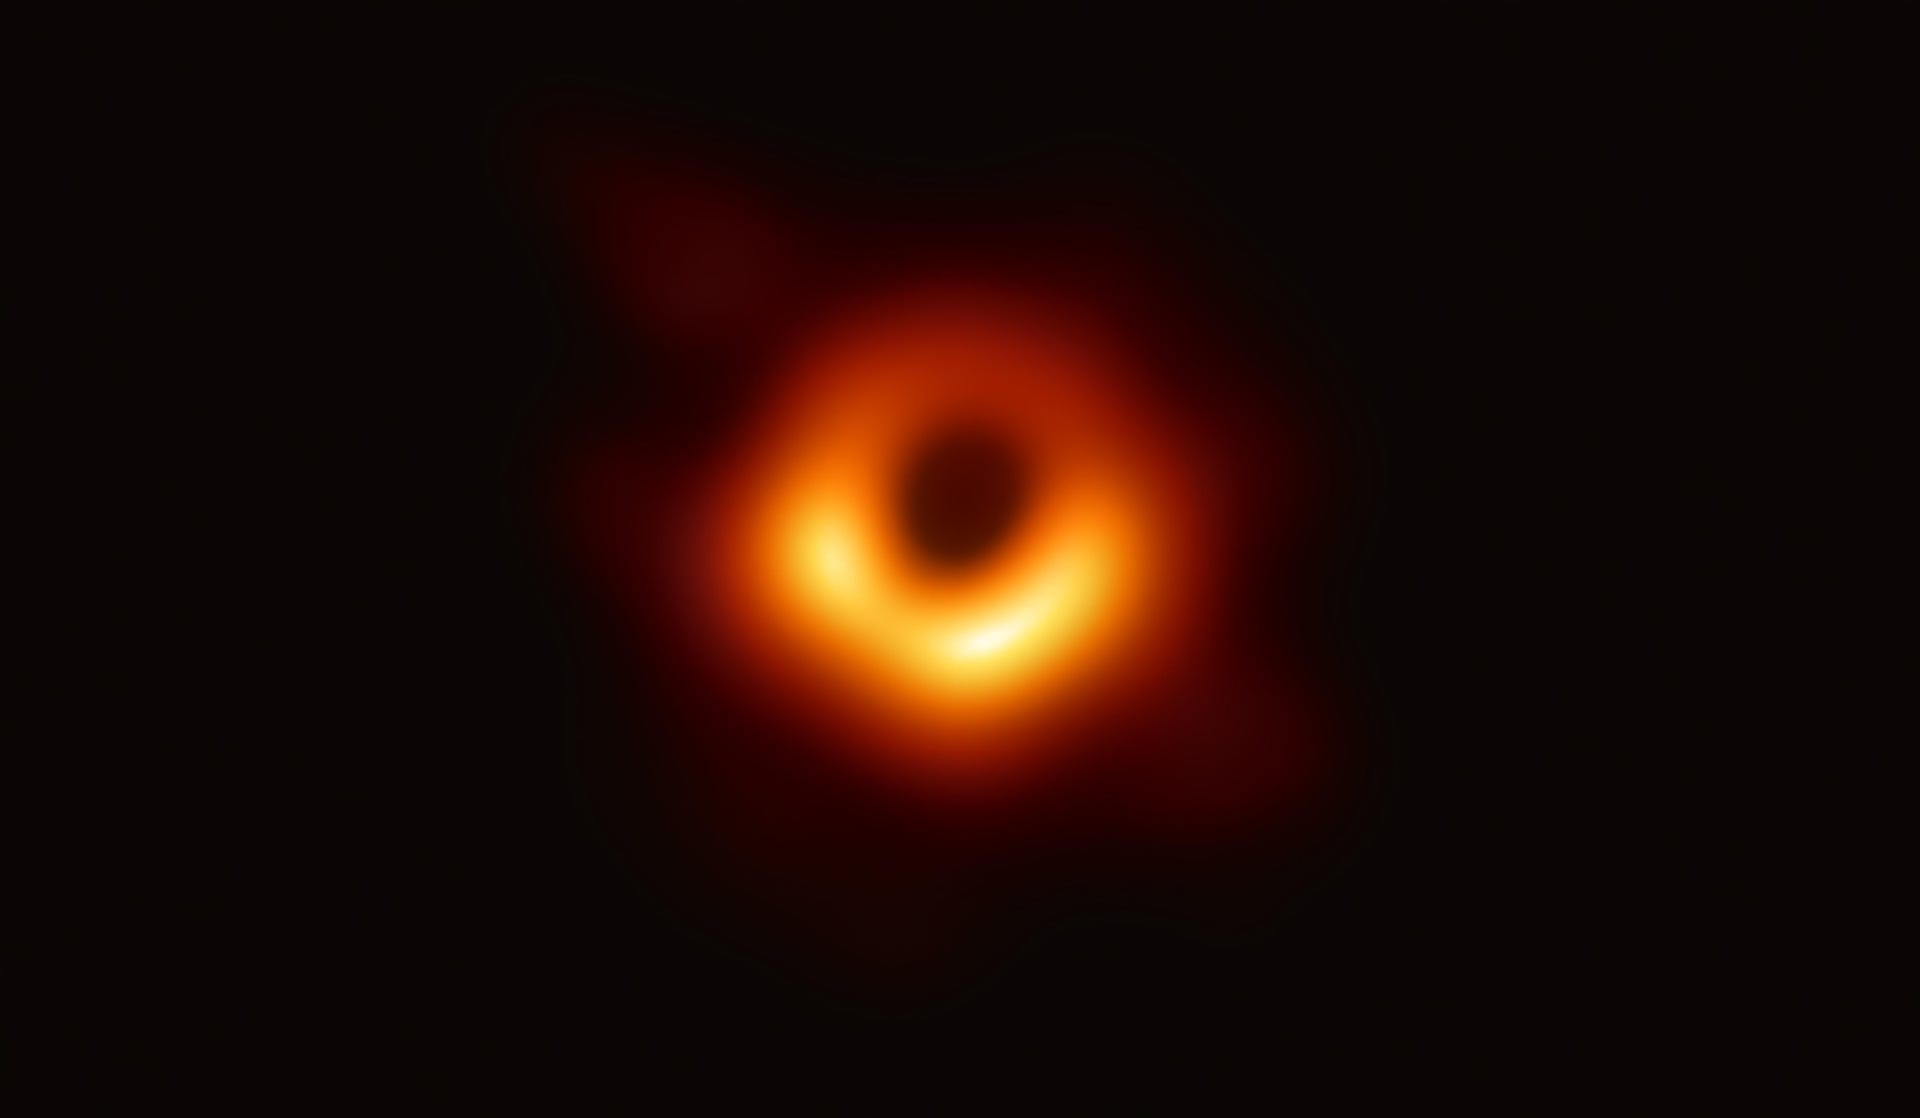 The first-ever image of a black hole, captured with the planetwide virtual array called the Event Horizon Telescope